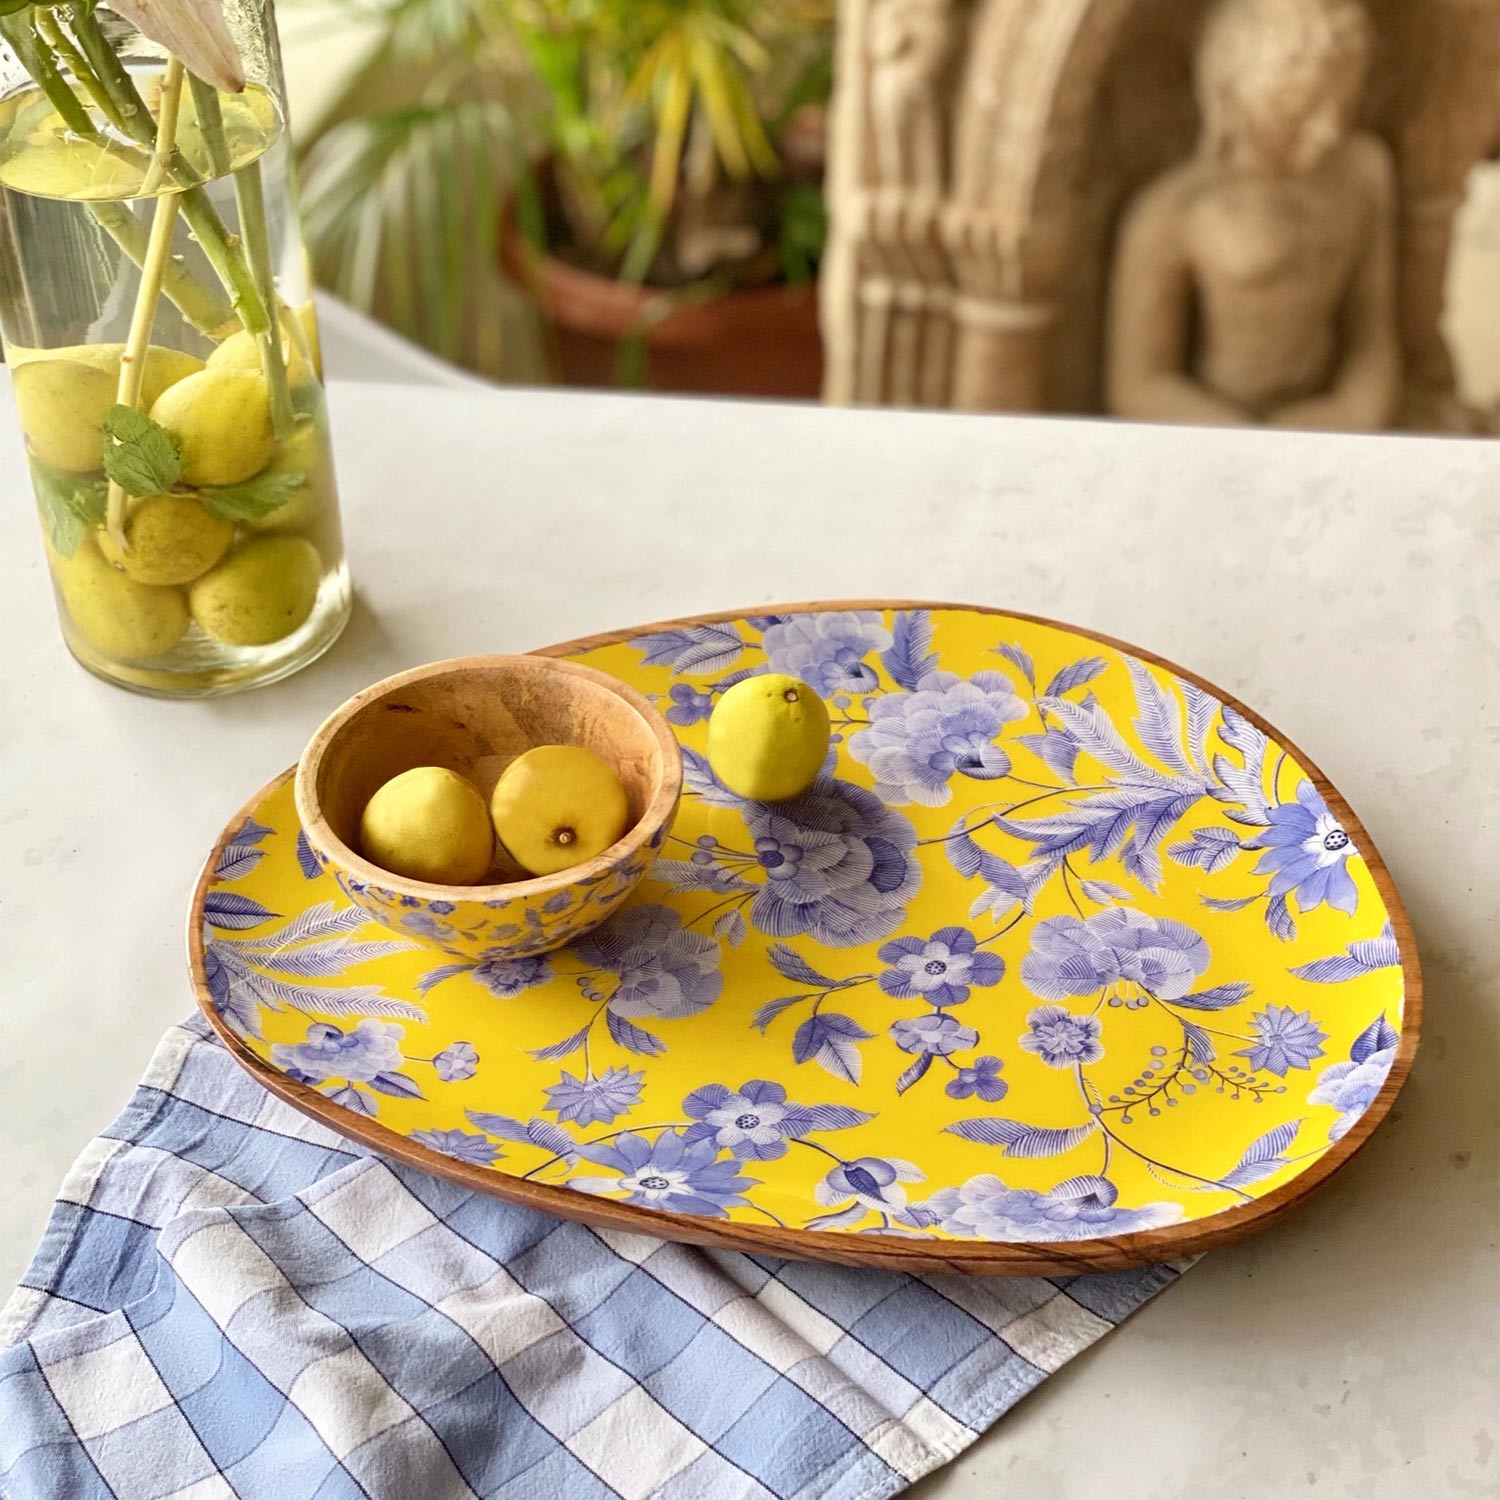 Oval Platters With Dip Bowls, Gift Set of 2 - Japanese Summer